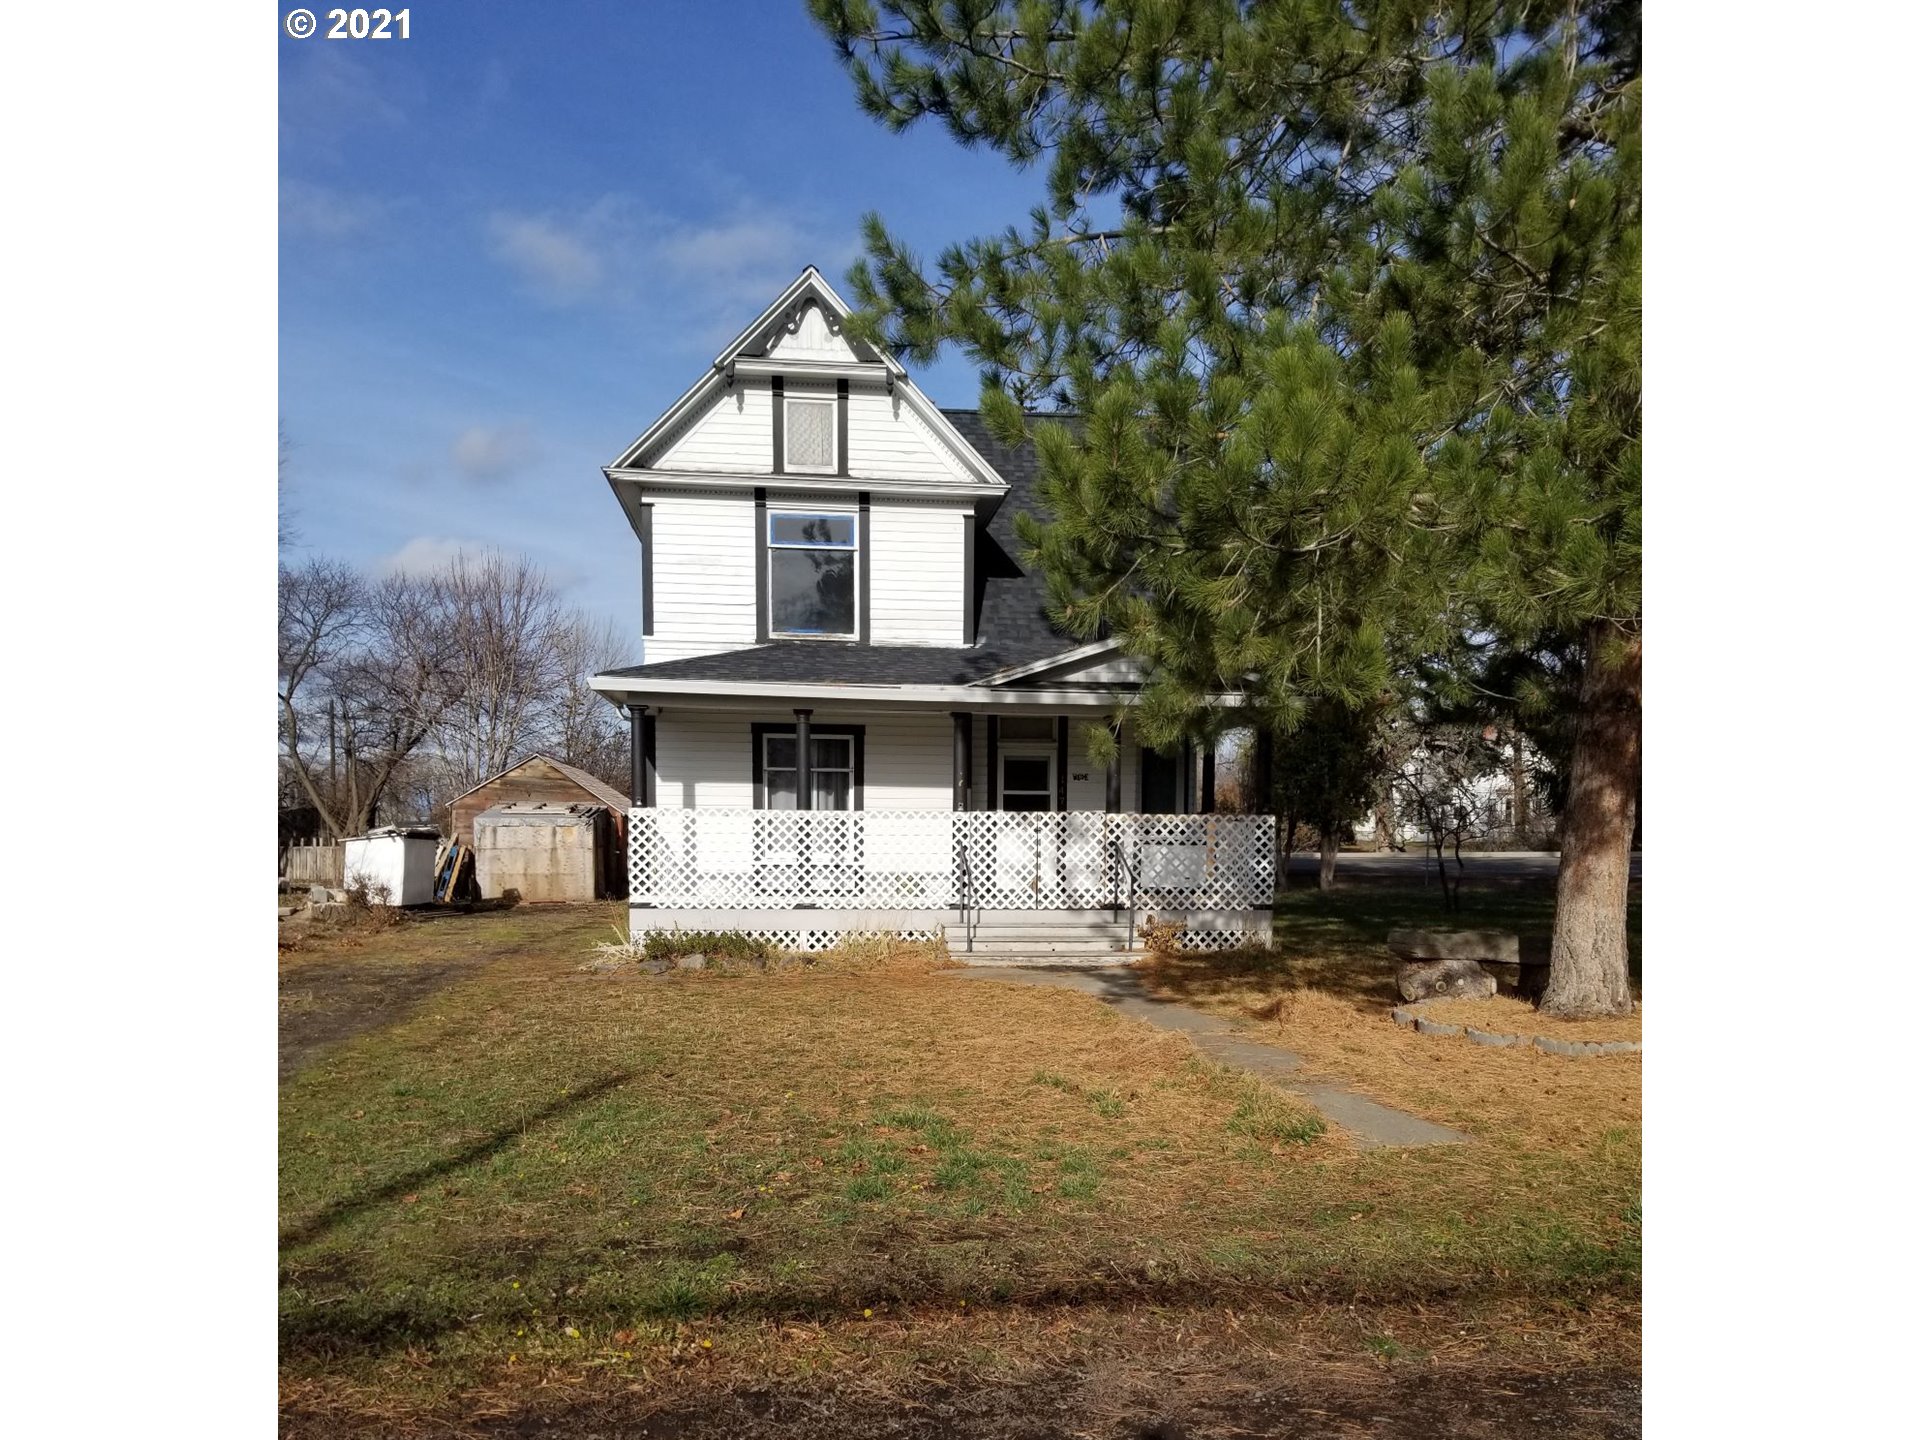 147 W BRYAN AVE (1 of 32)